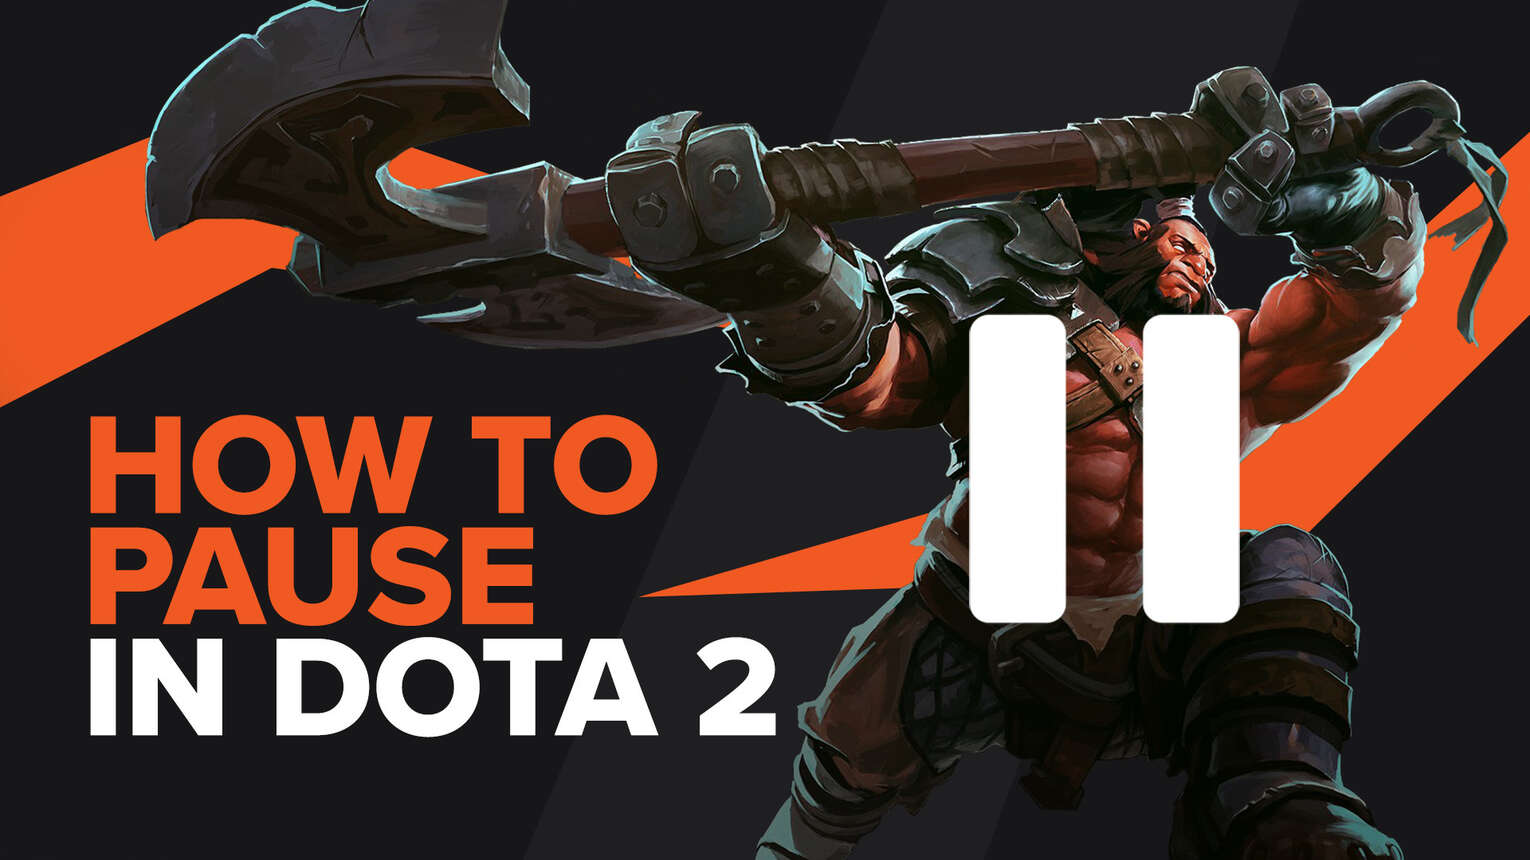 How to pause Dota 2 (The Easy Way)